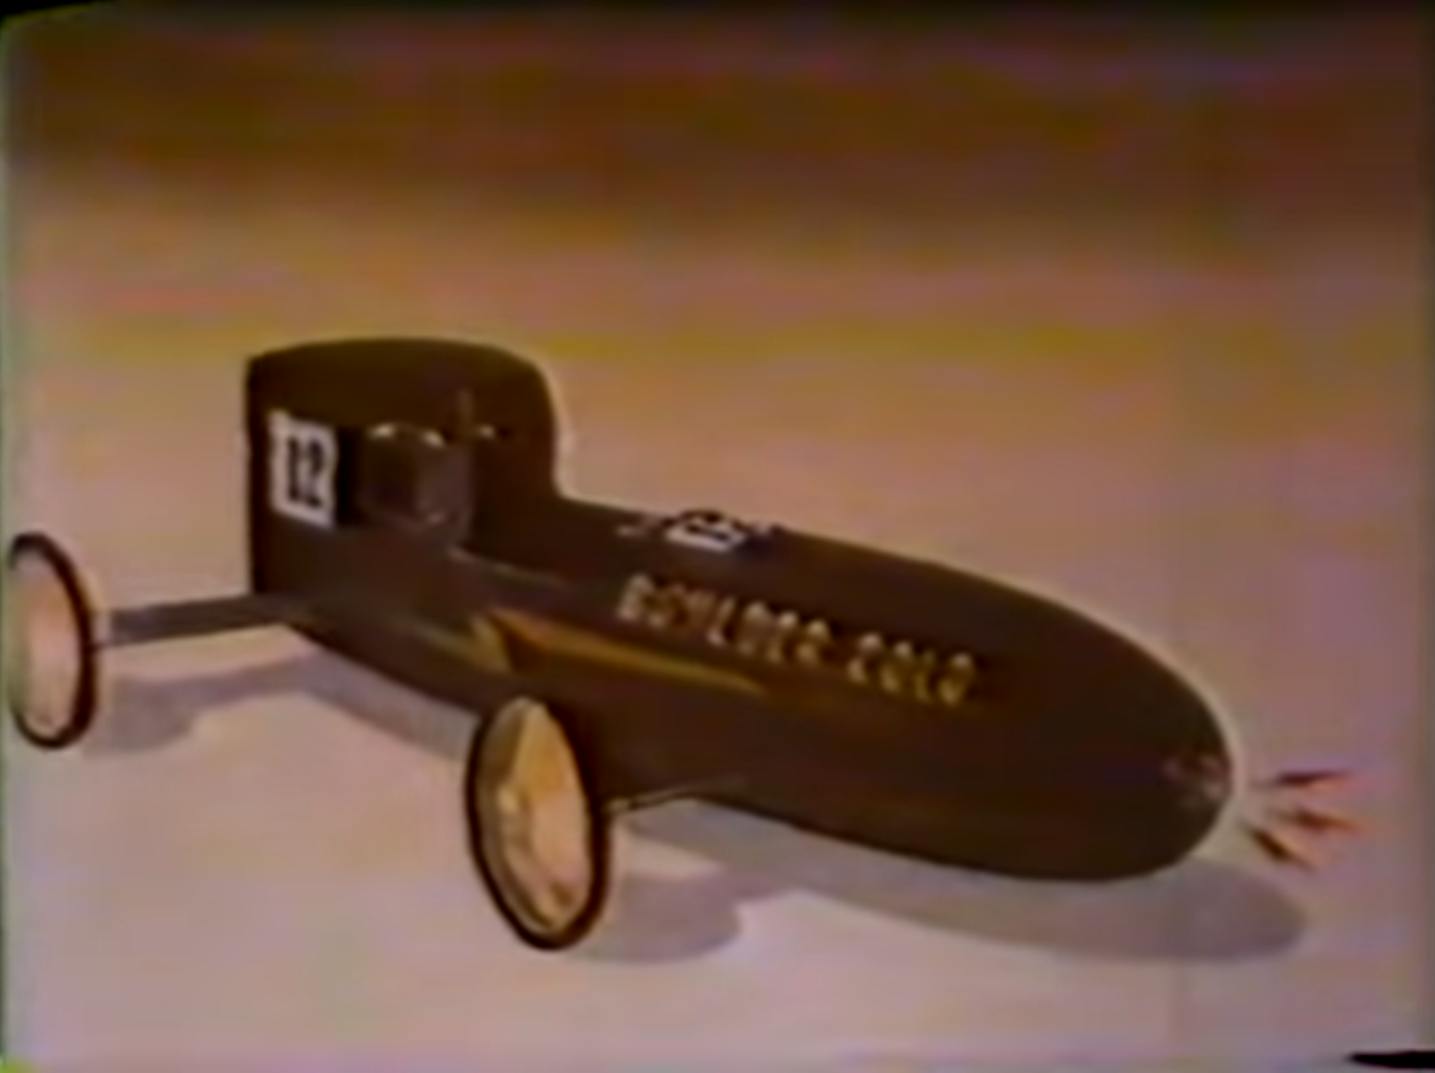 Pinewood Derby One-Day Intensive - America's Car Museum